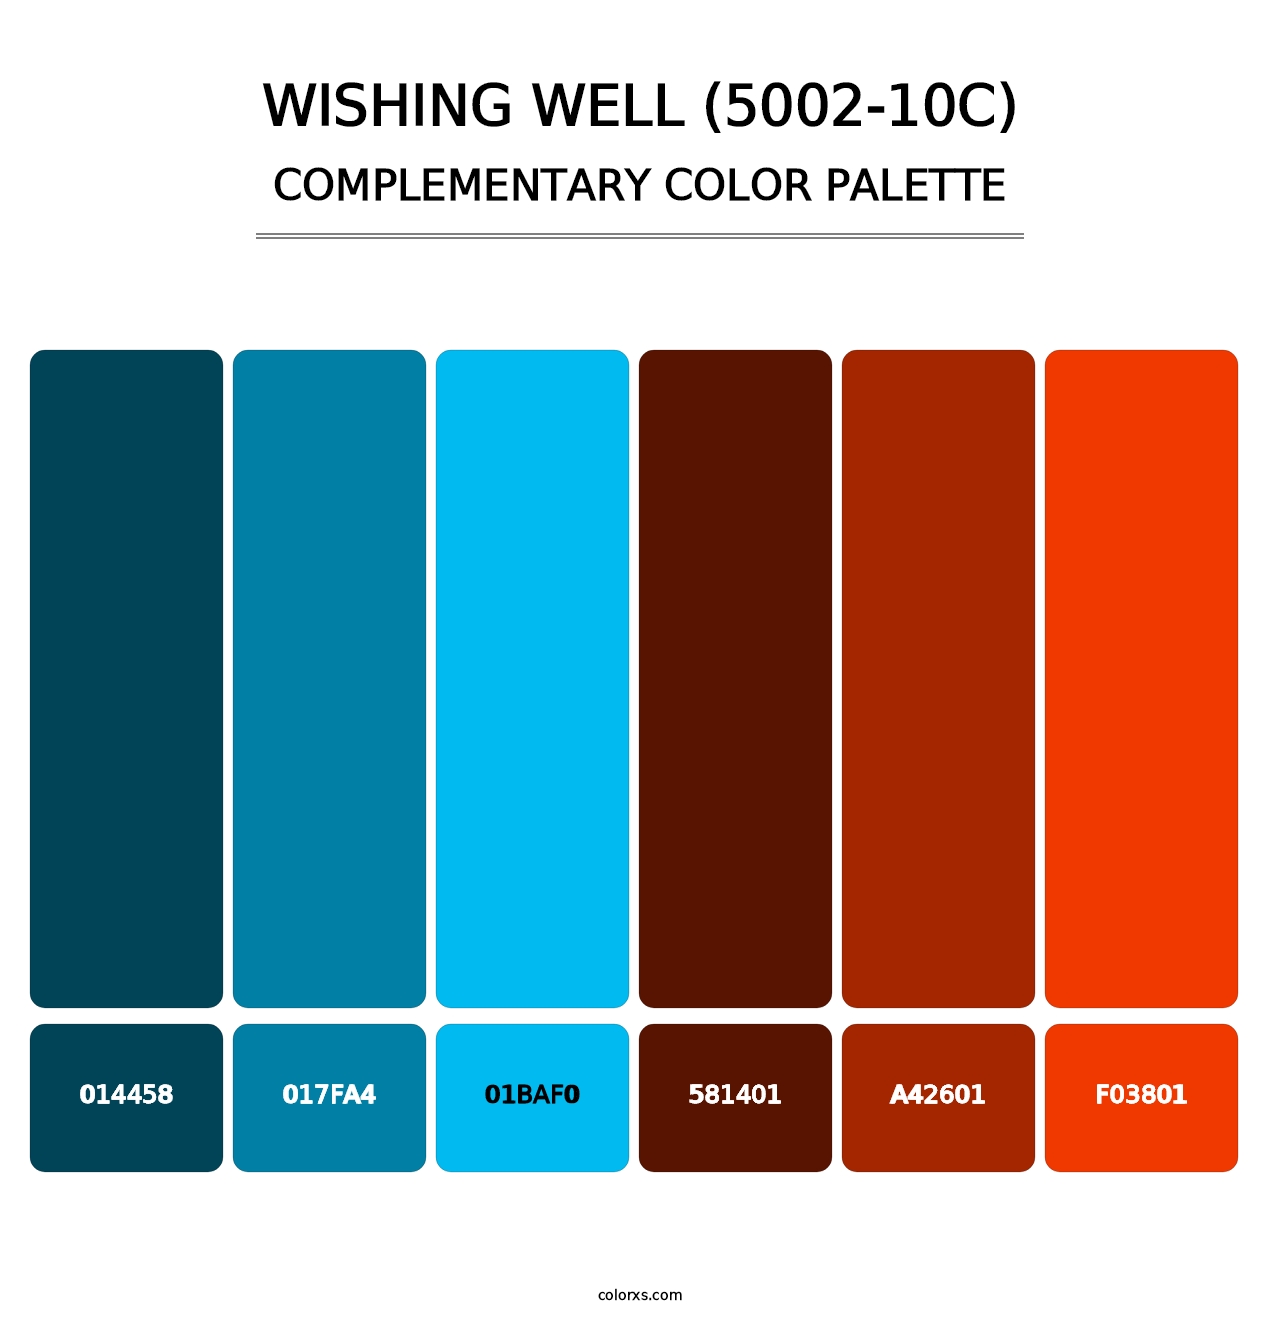 Wishing Well (5002-10C) - Complementary Color Palette